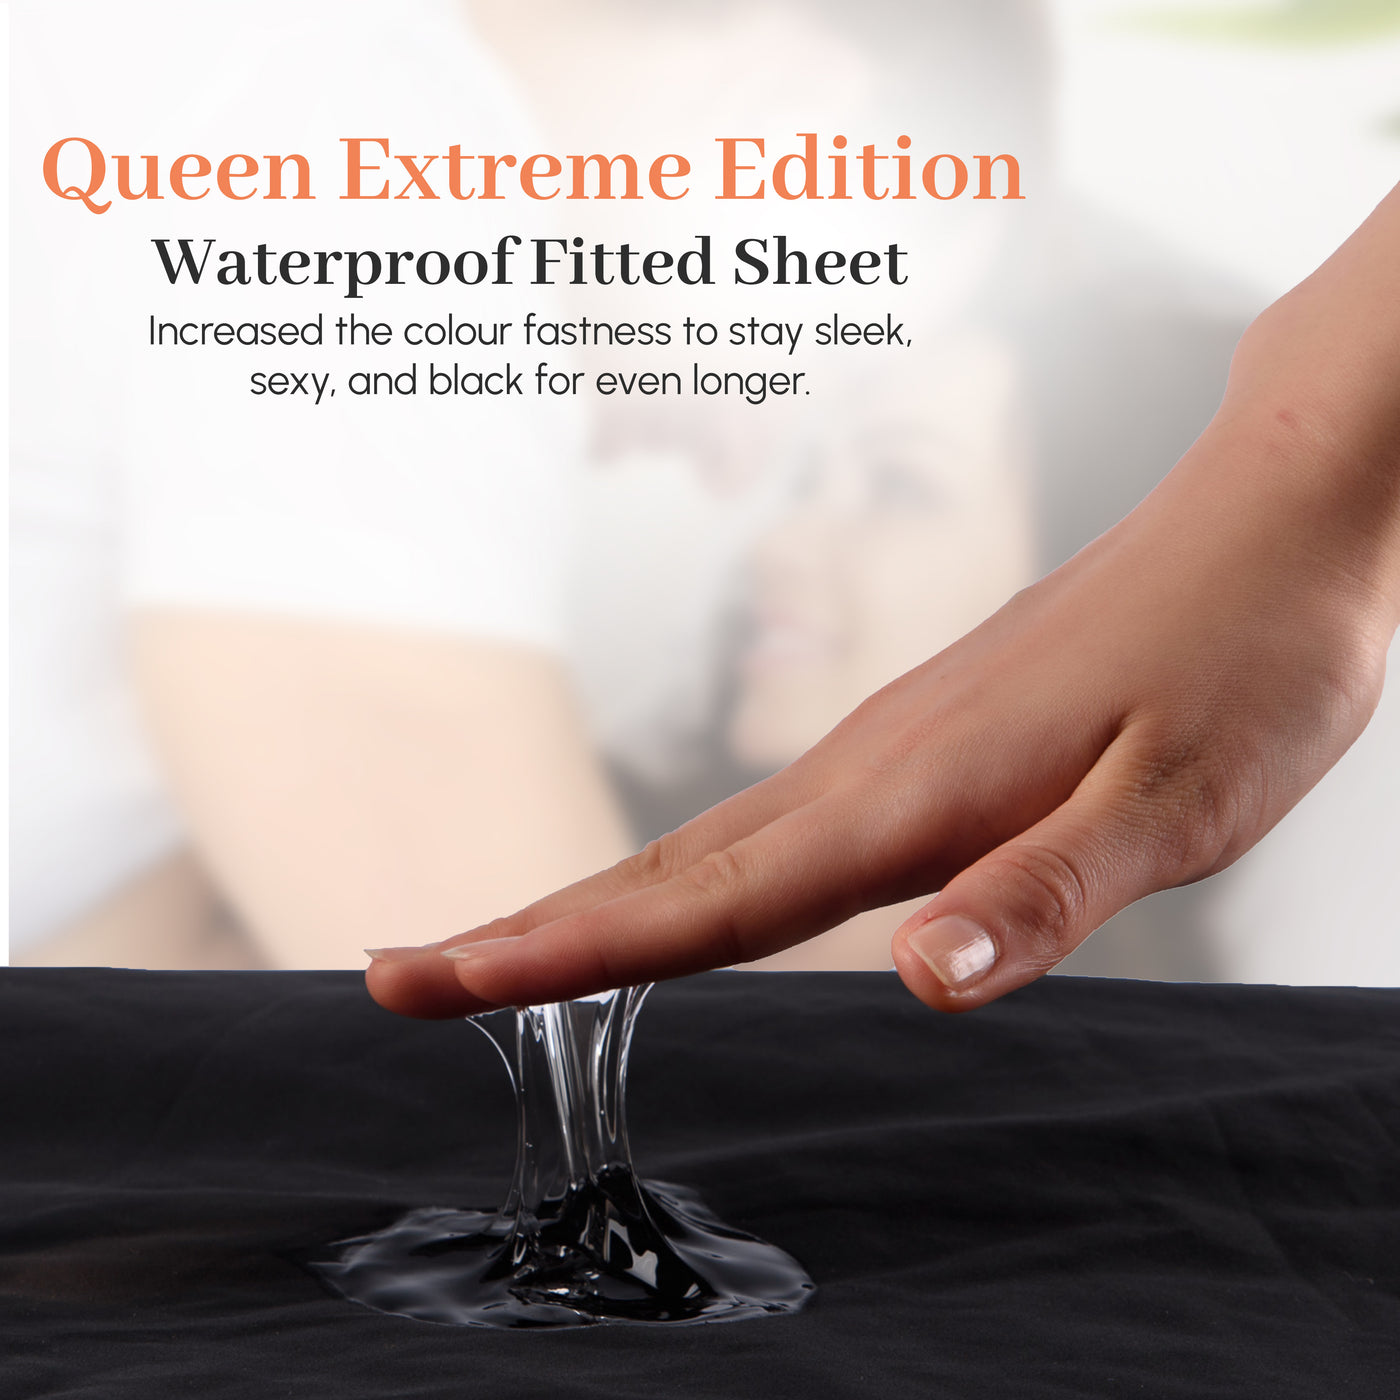 Eroticgel Queen Waterproof Fitted Sheet EXTREME Edition 152cm x 203cm + 35cm (60″ x 80″ +14″)